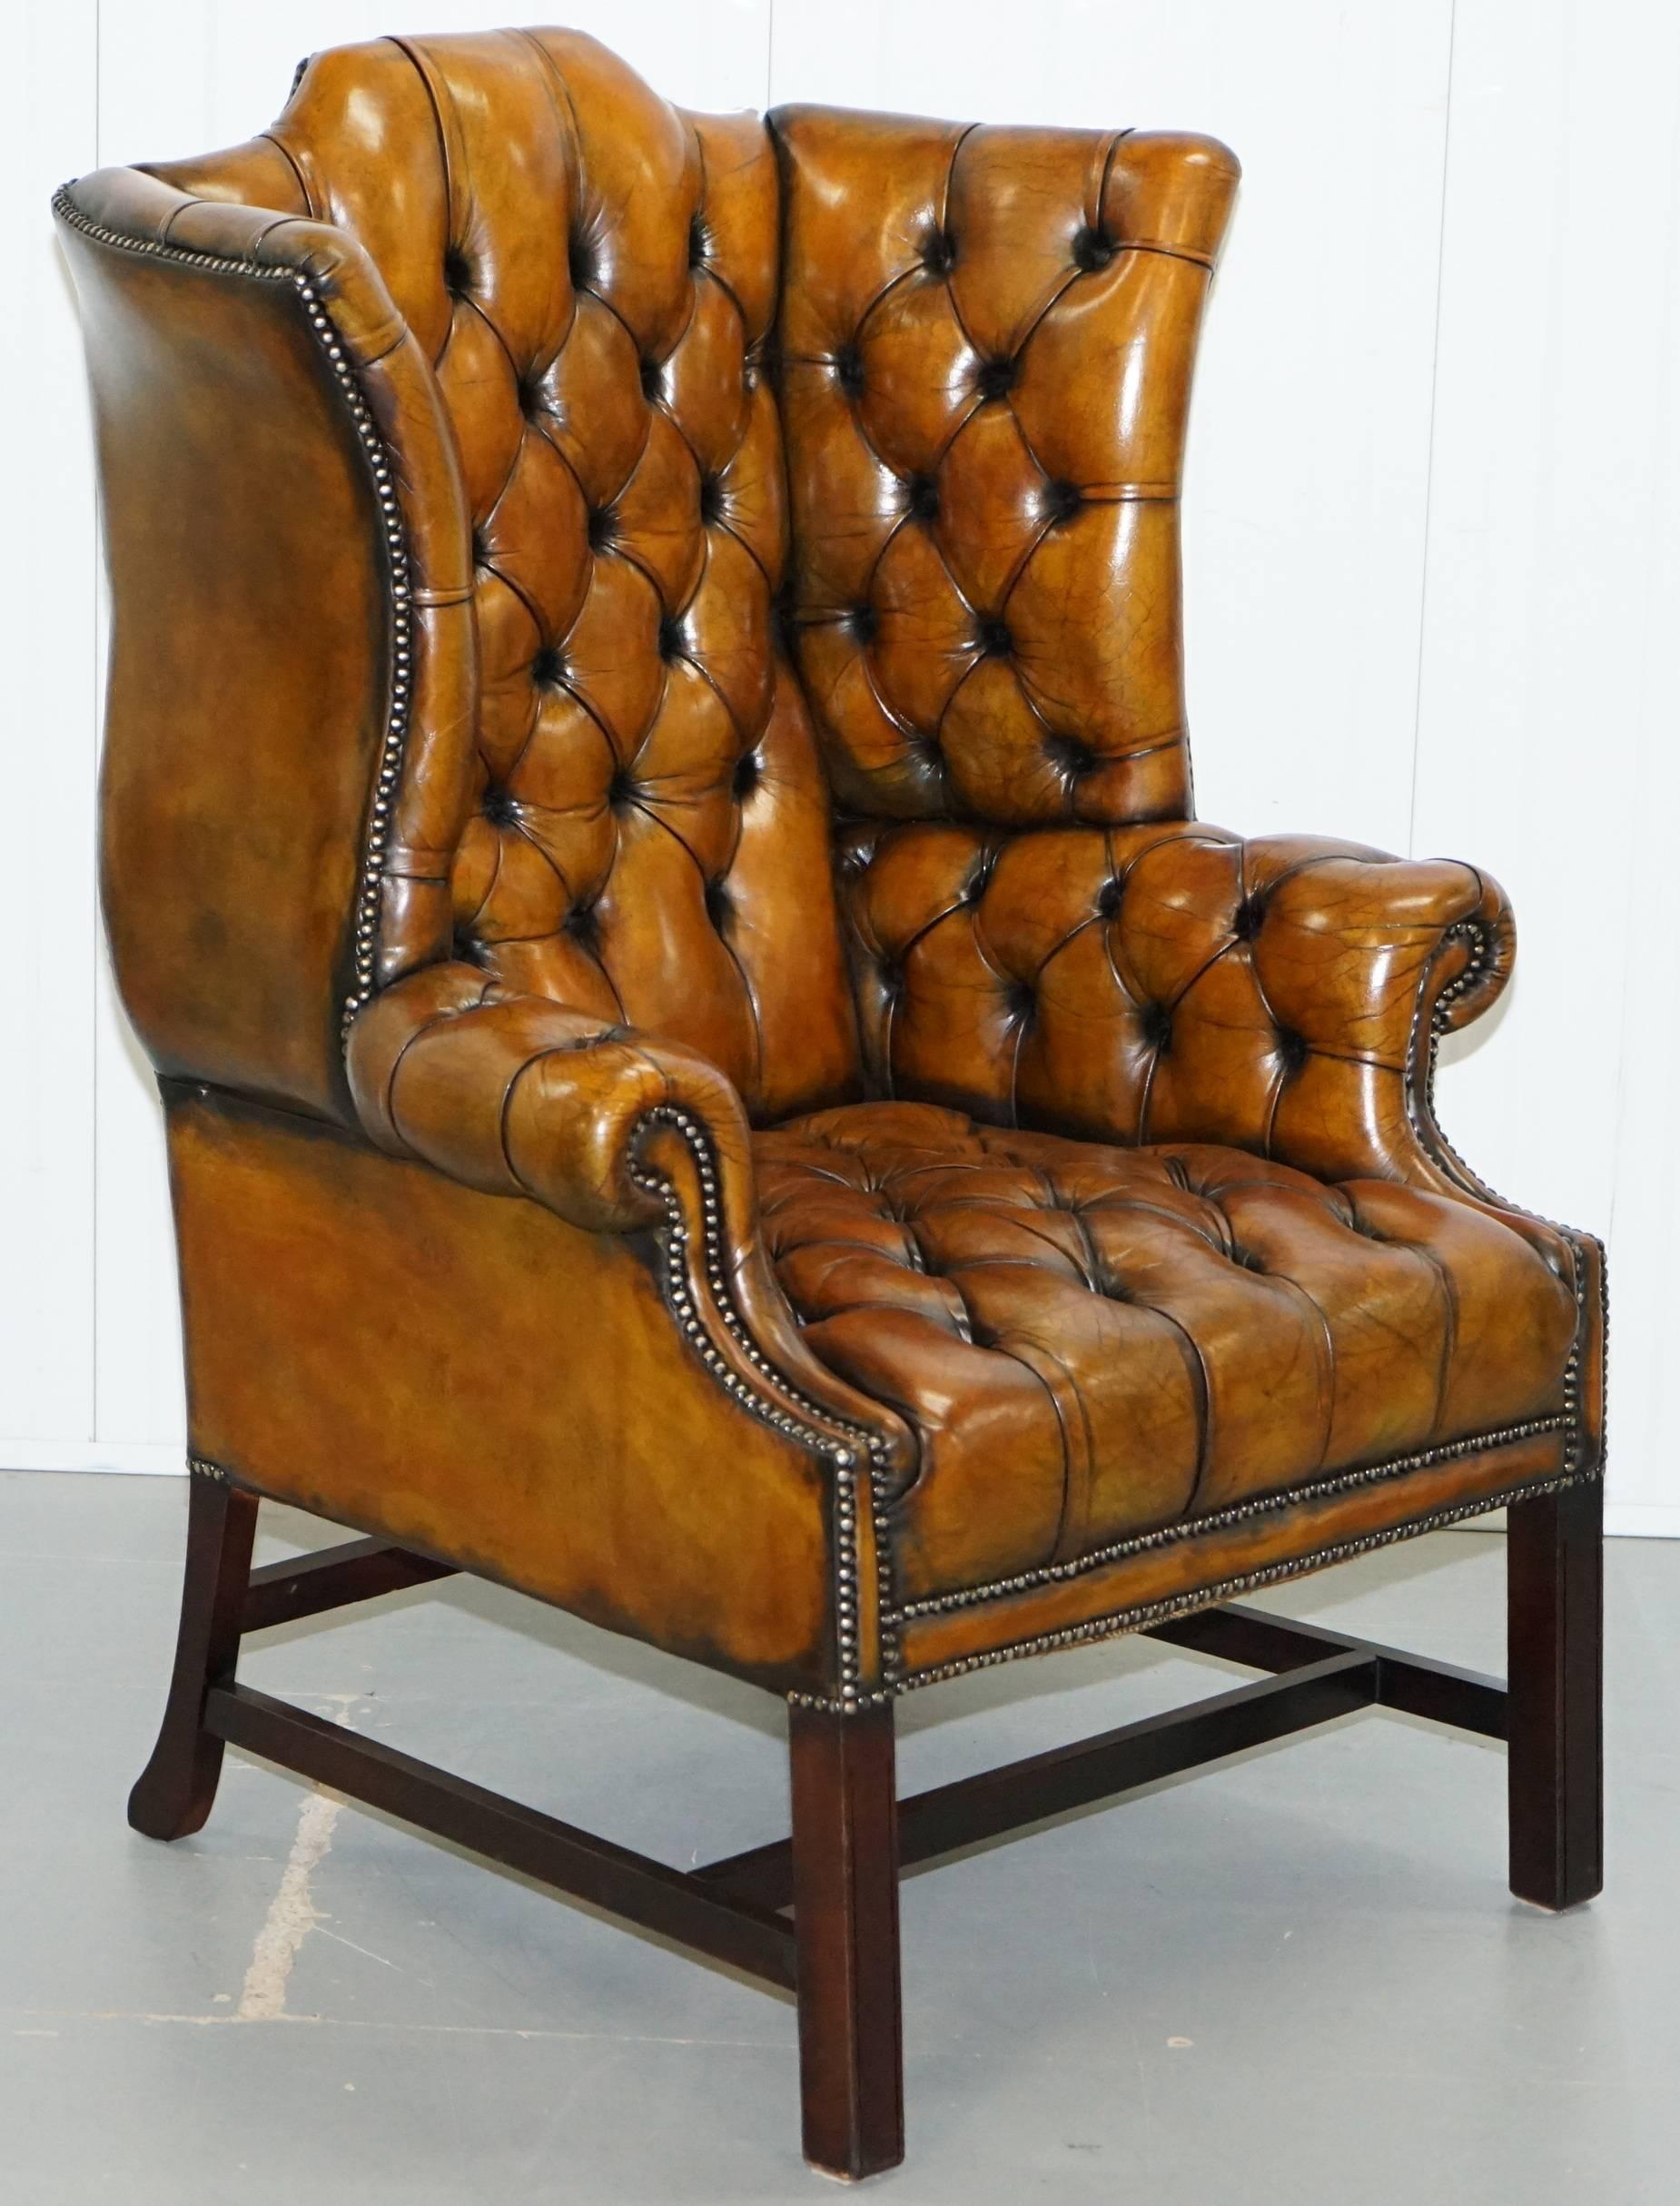 We are delighted to offer for sale lovely antique Georgian style vintage wingback armchair in fully restored condition

A very good looking and decorative wingback armchair with the Georgian H framed base. Its called a H-frame because if you lay